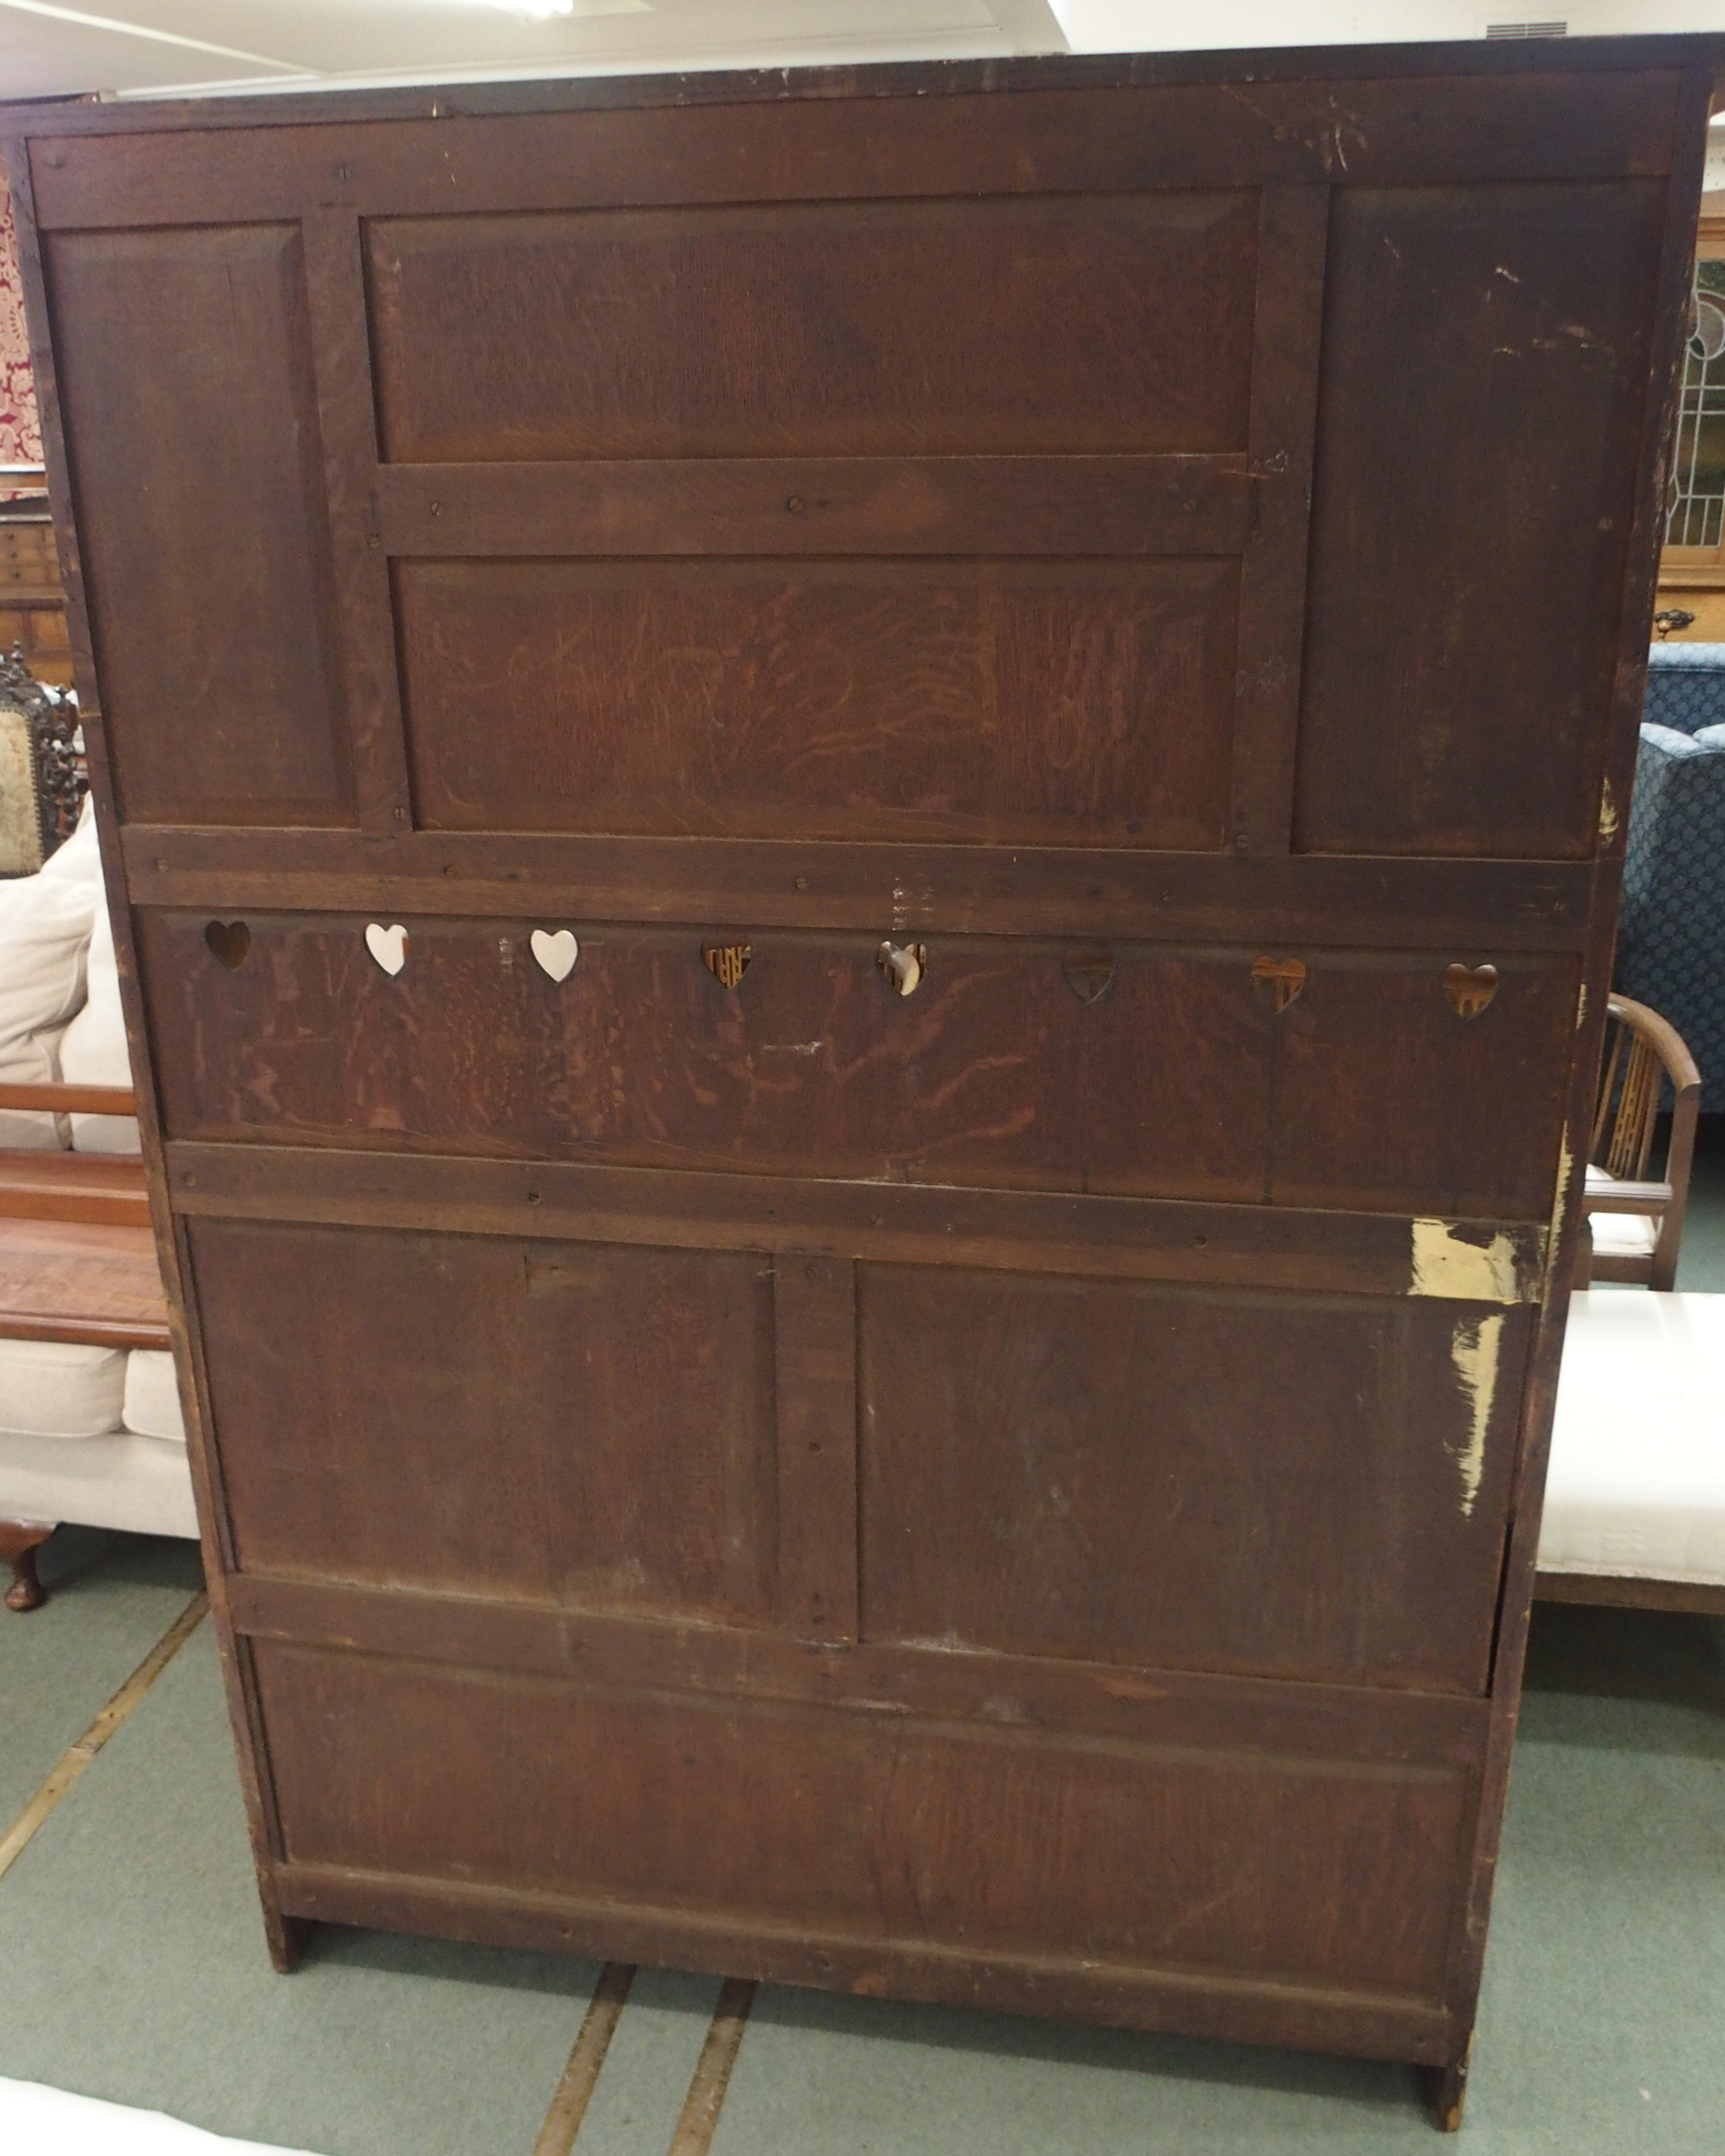 AN ARTS AND CRAFTS OAK DRESSER with open shelves, flanked by embossed inset brass panels and - Image 9 of 15